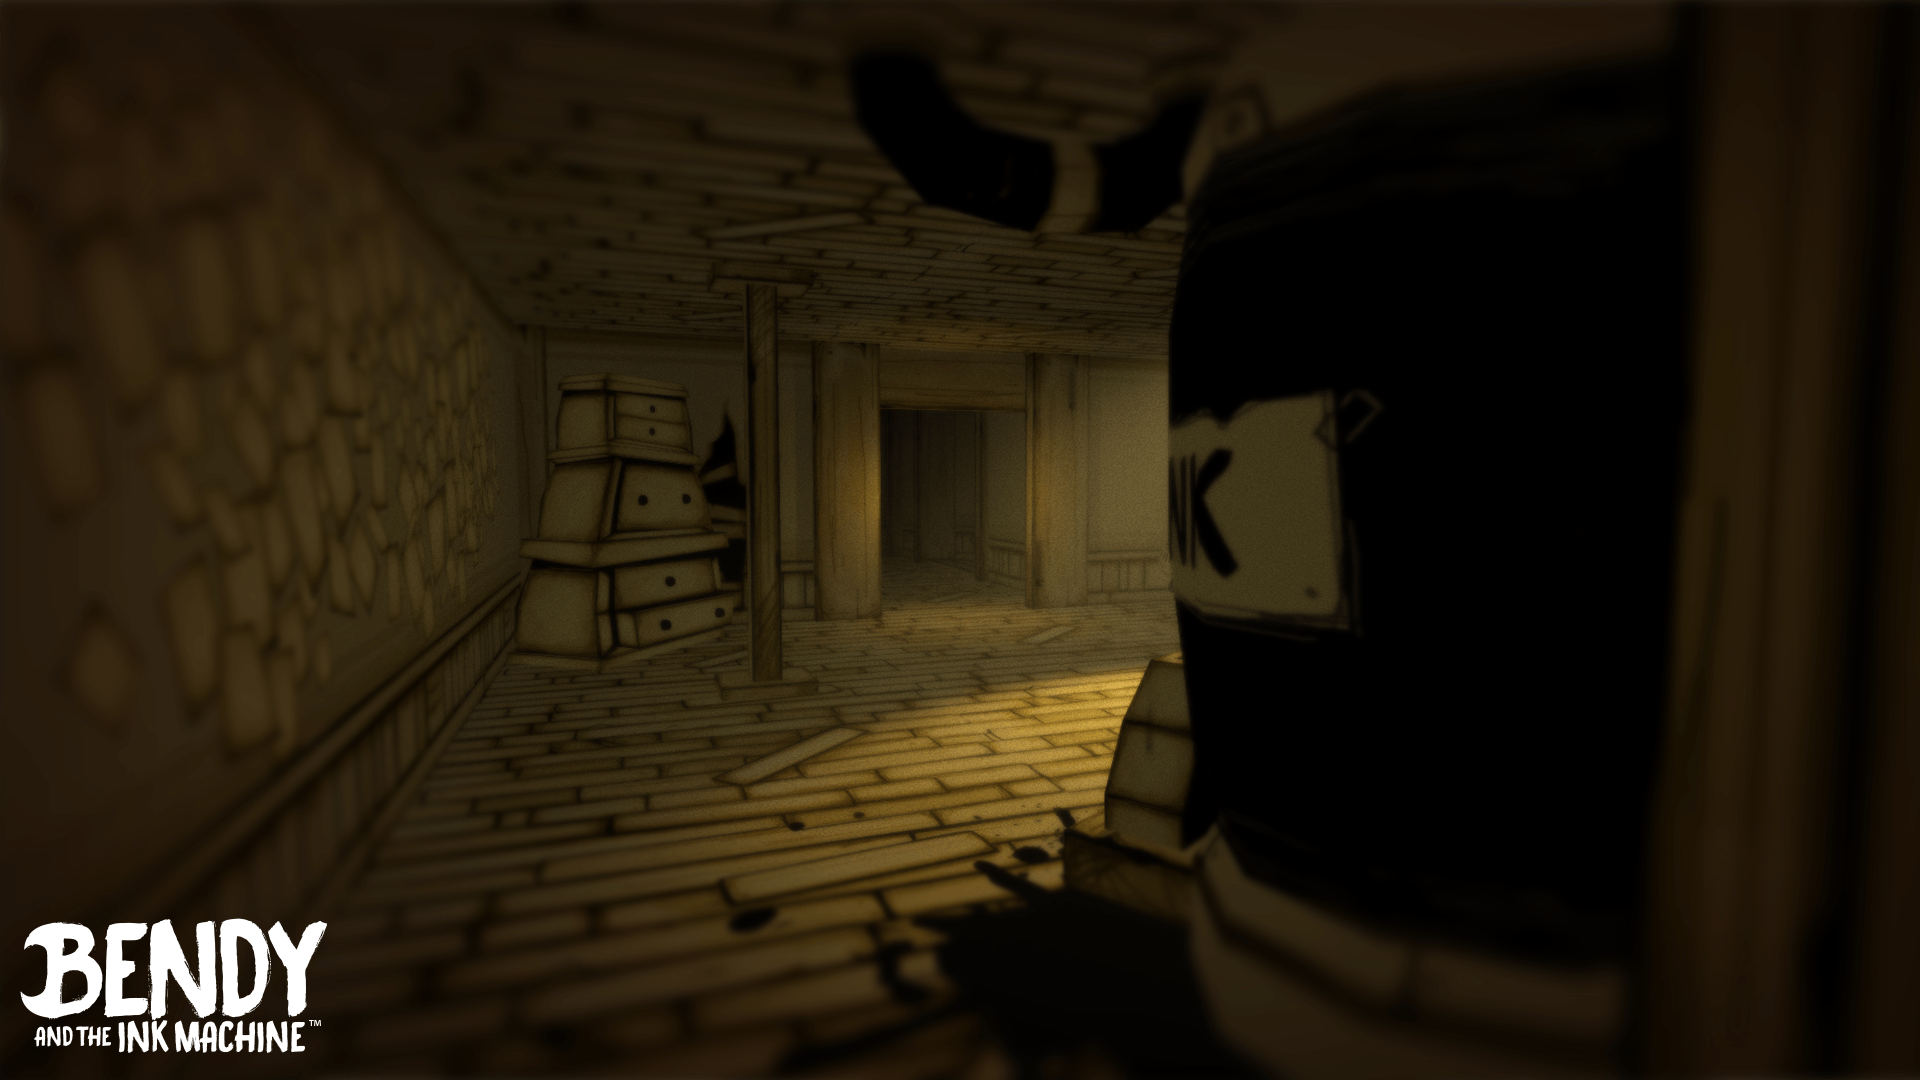 BendySample1.png. Bendy and the Ink Machine